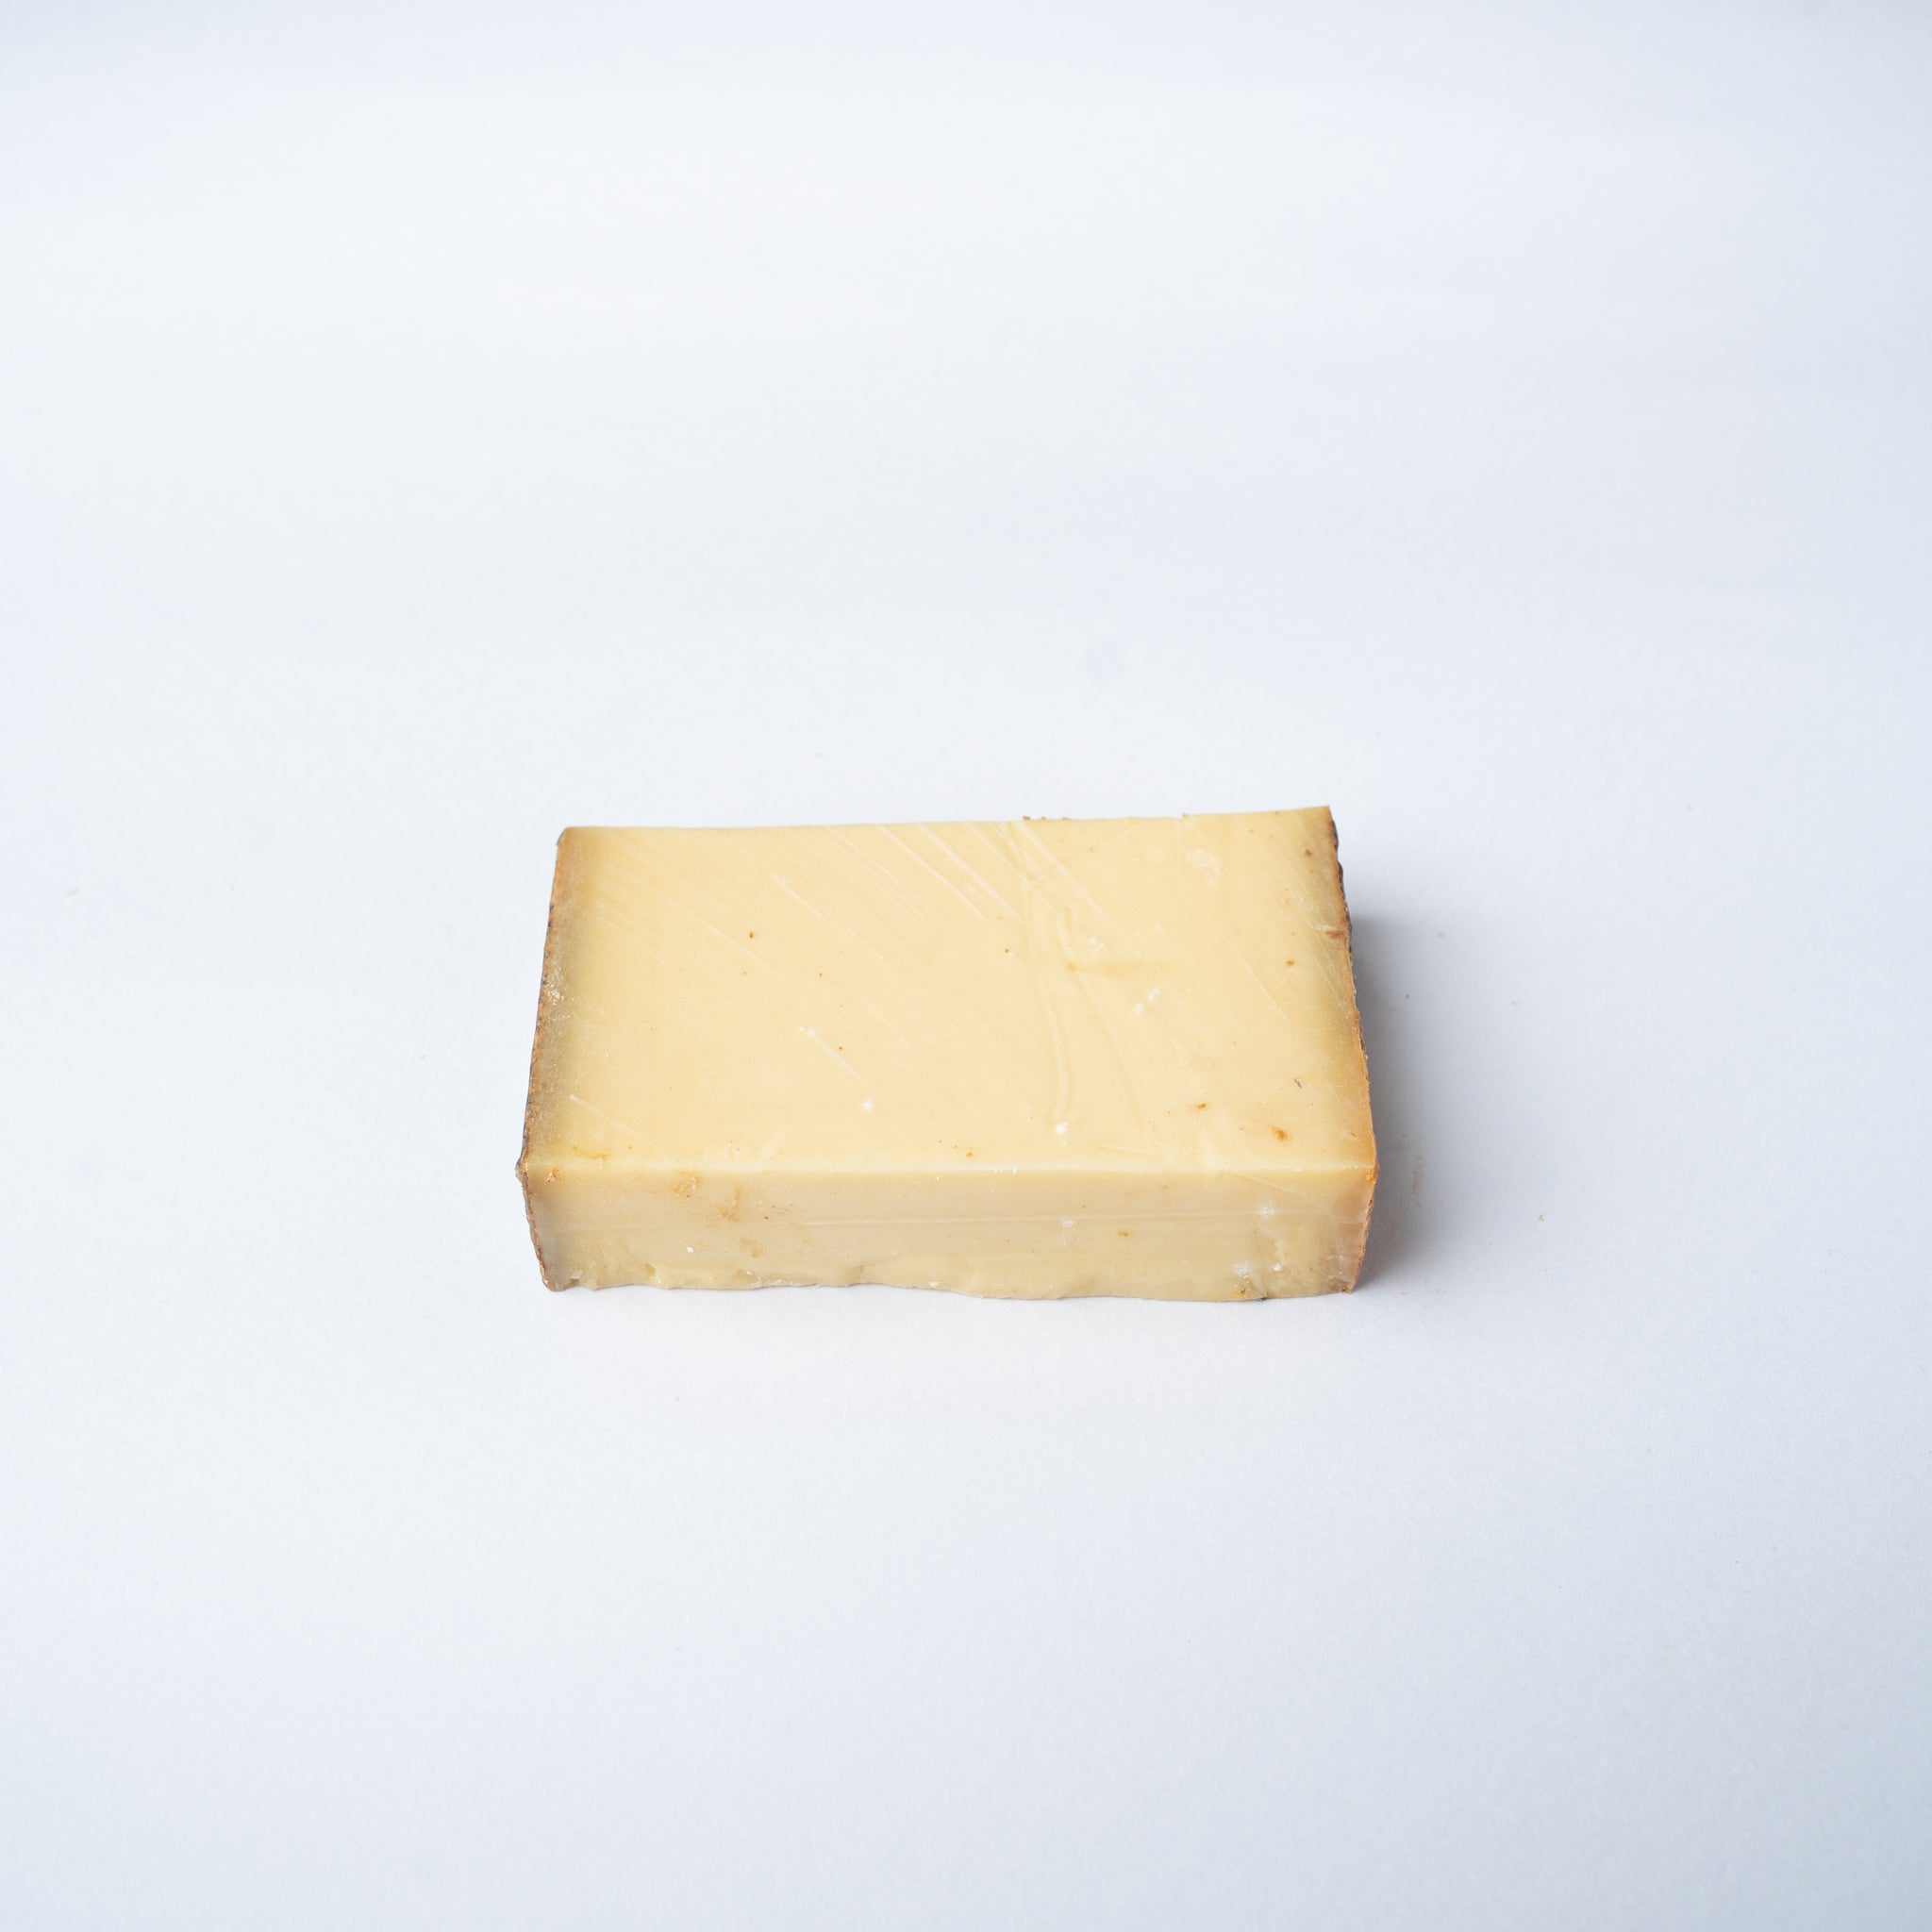 A 200g wedge of perfectly aged 24 month Comté cheese.